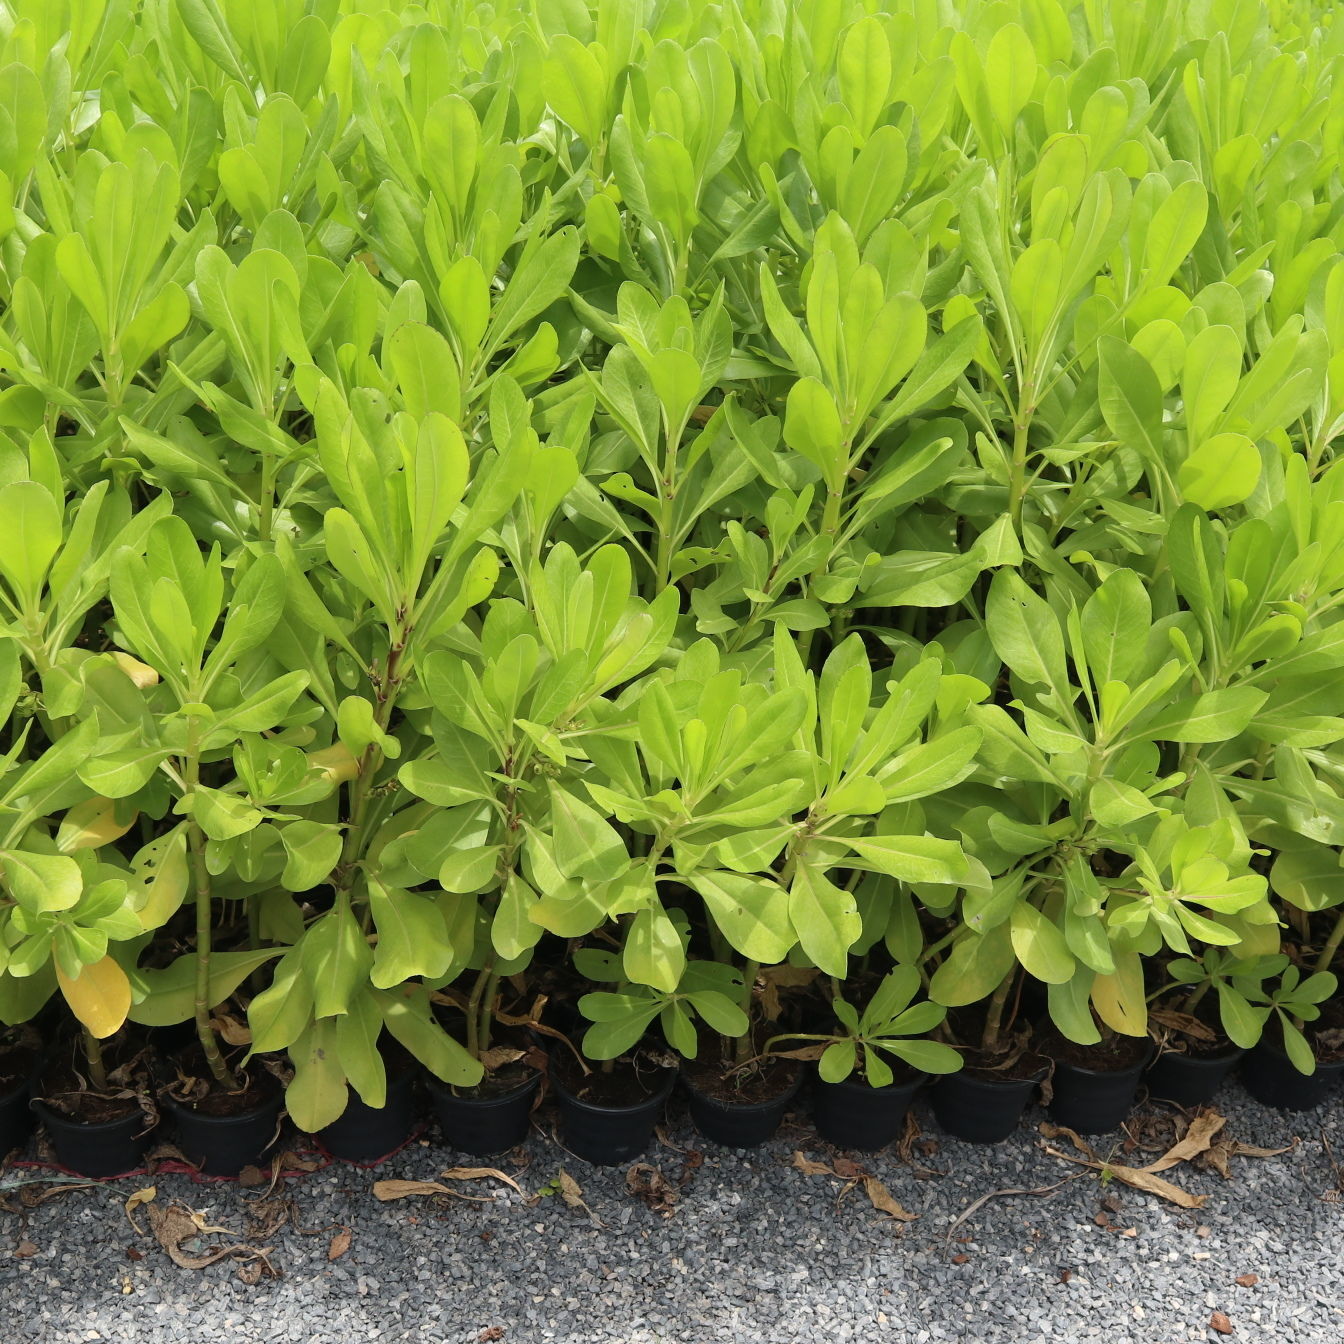 scaevola plants ready to ship out